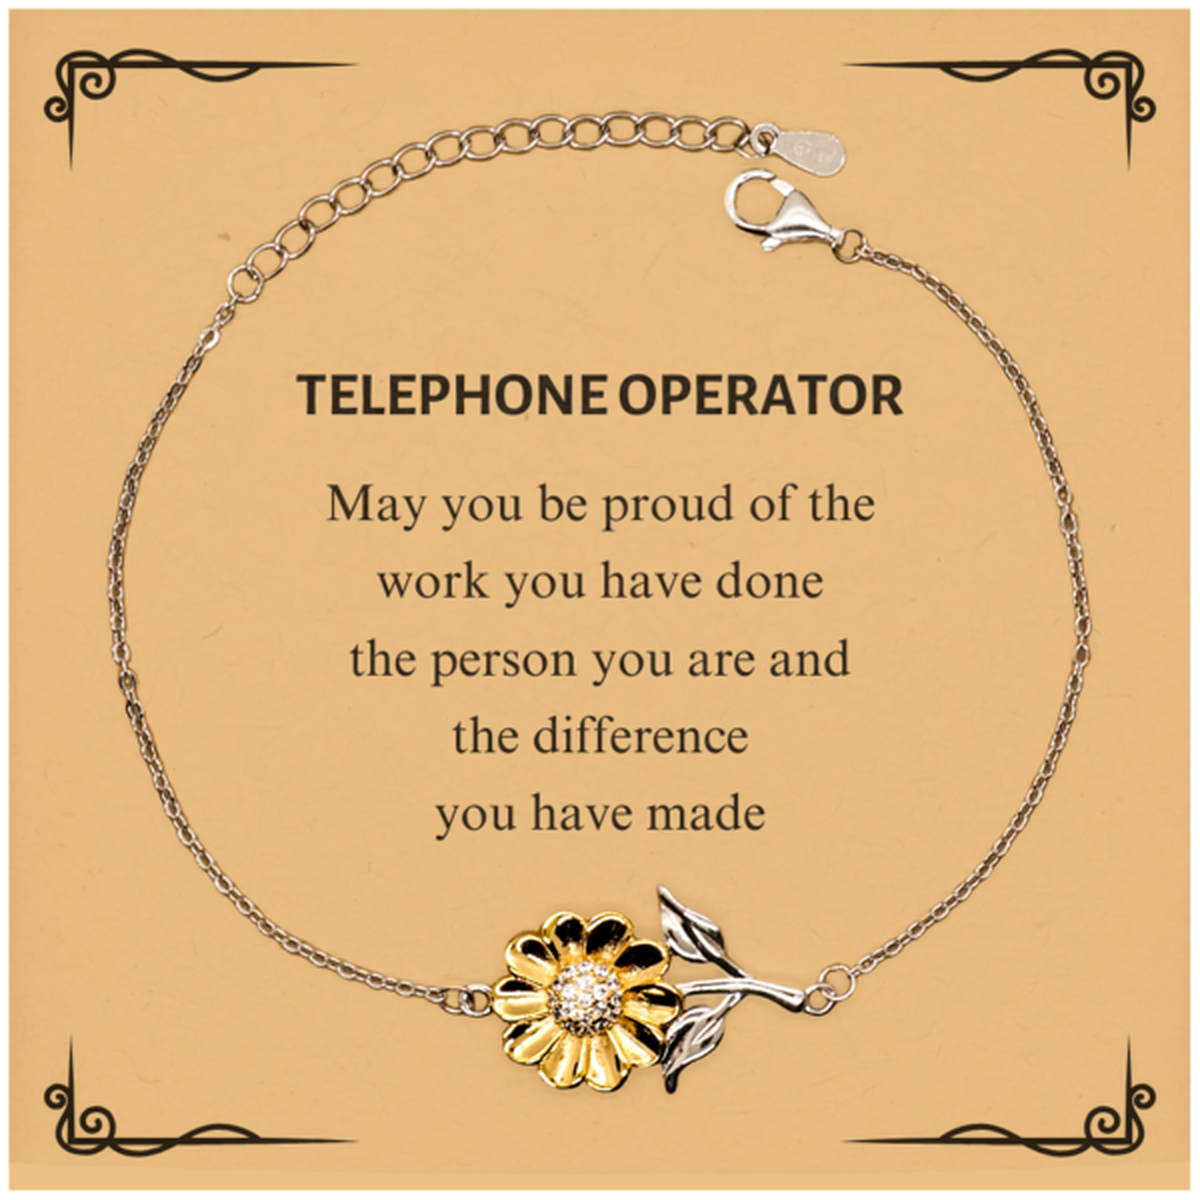 Telephone Operator May you be proud of the work you have done, Retirement Telephone Operator Sunflower Bracelet for Colleague Appreciation Gifts Amazing for Telephone Operator